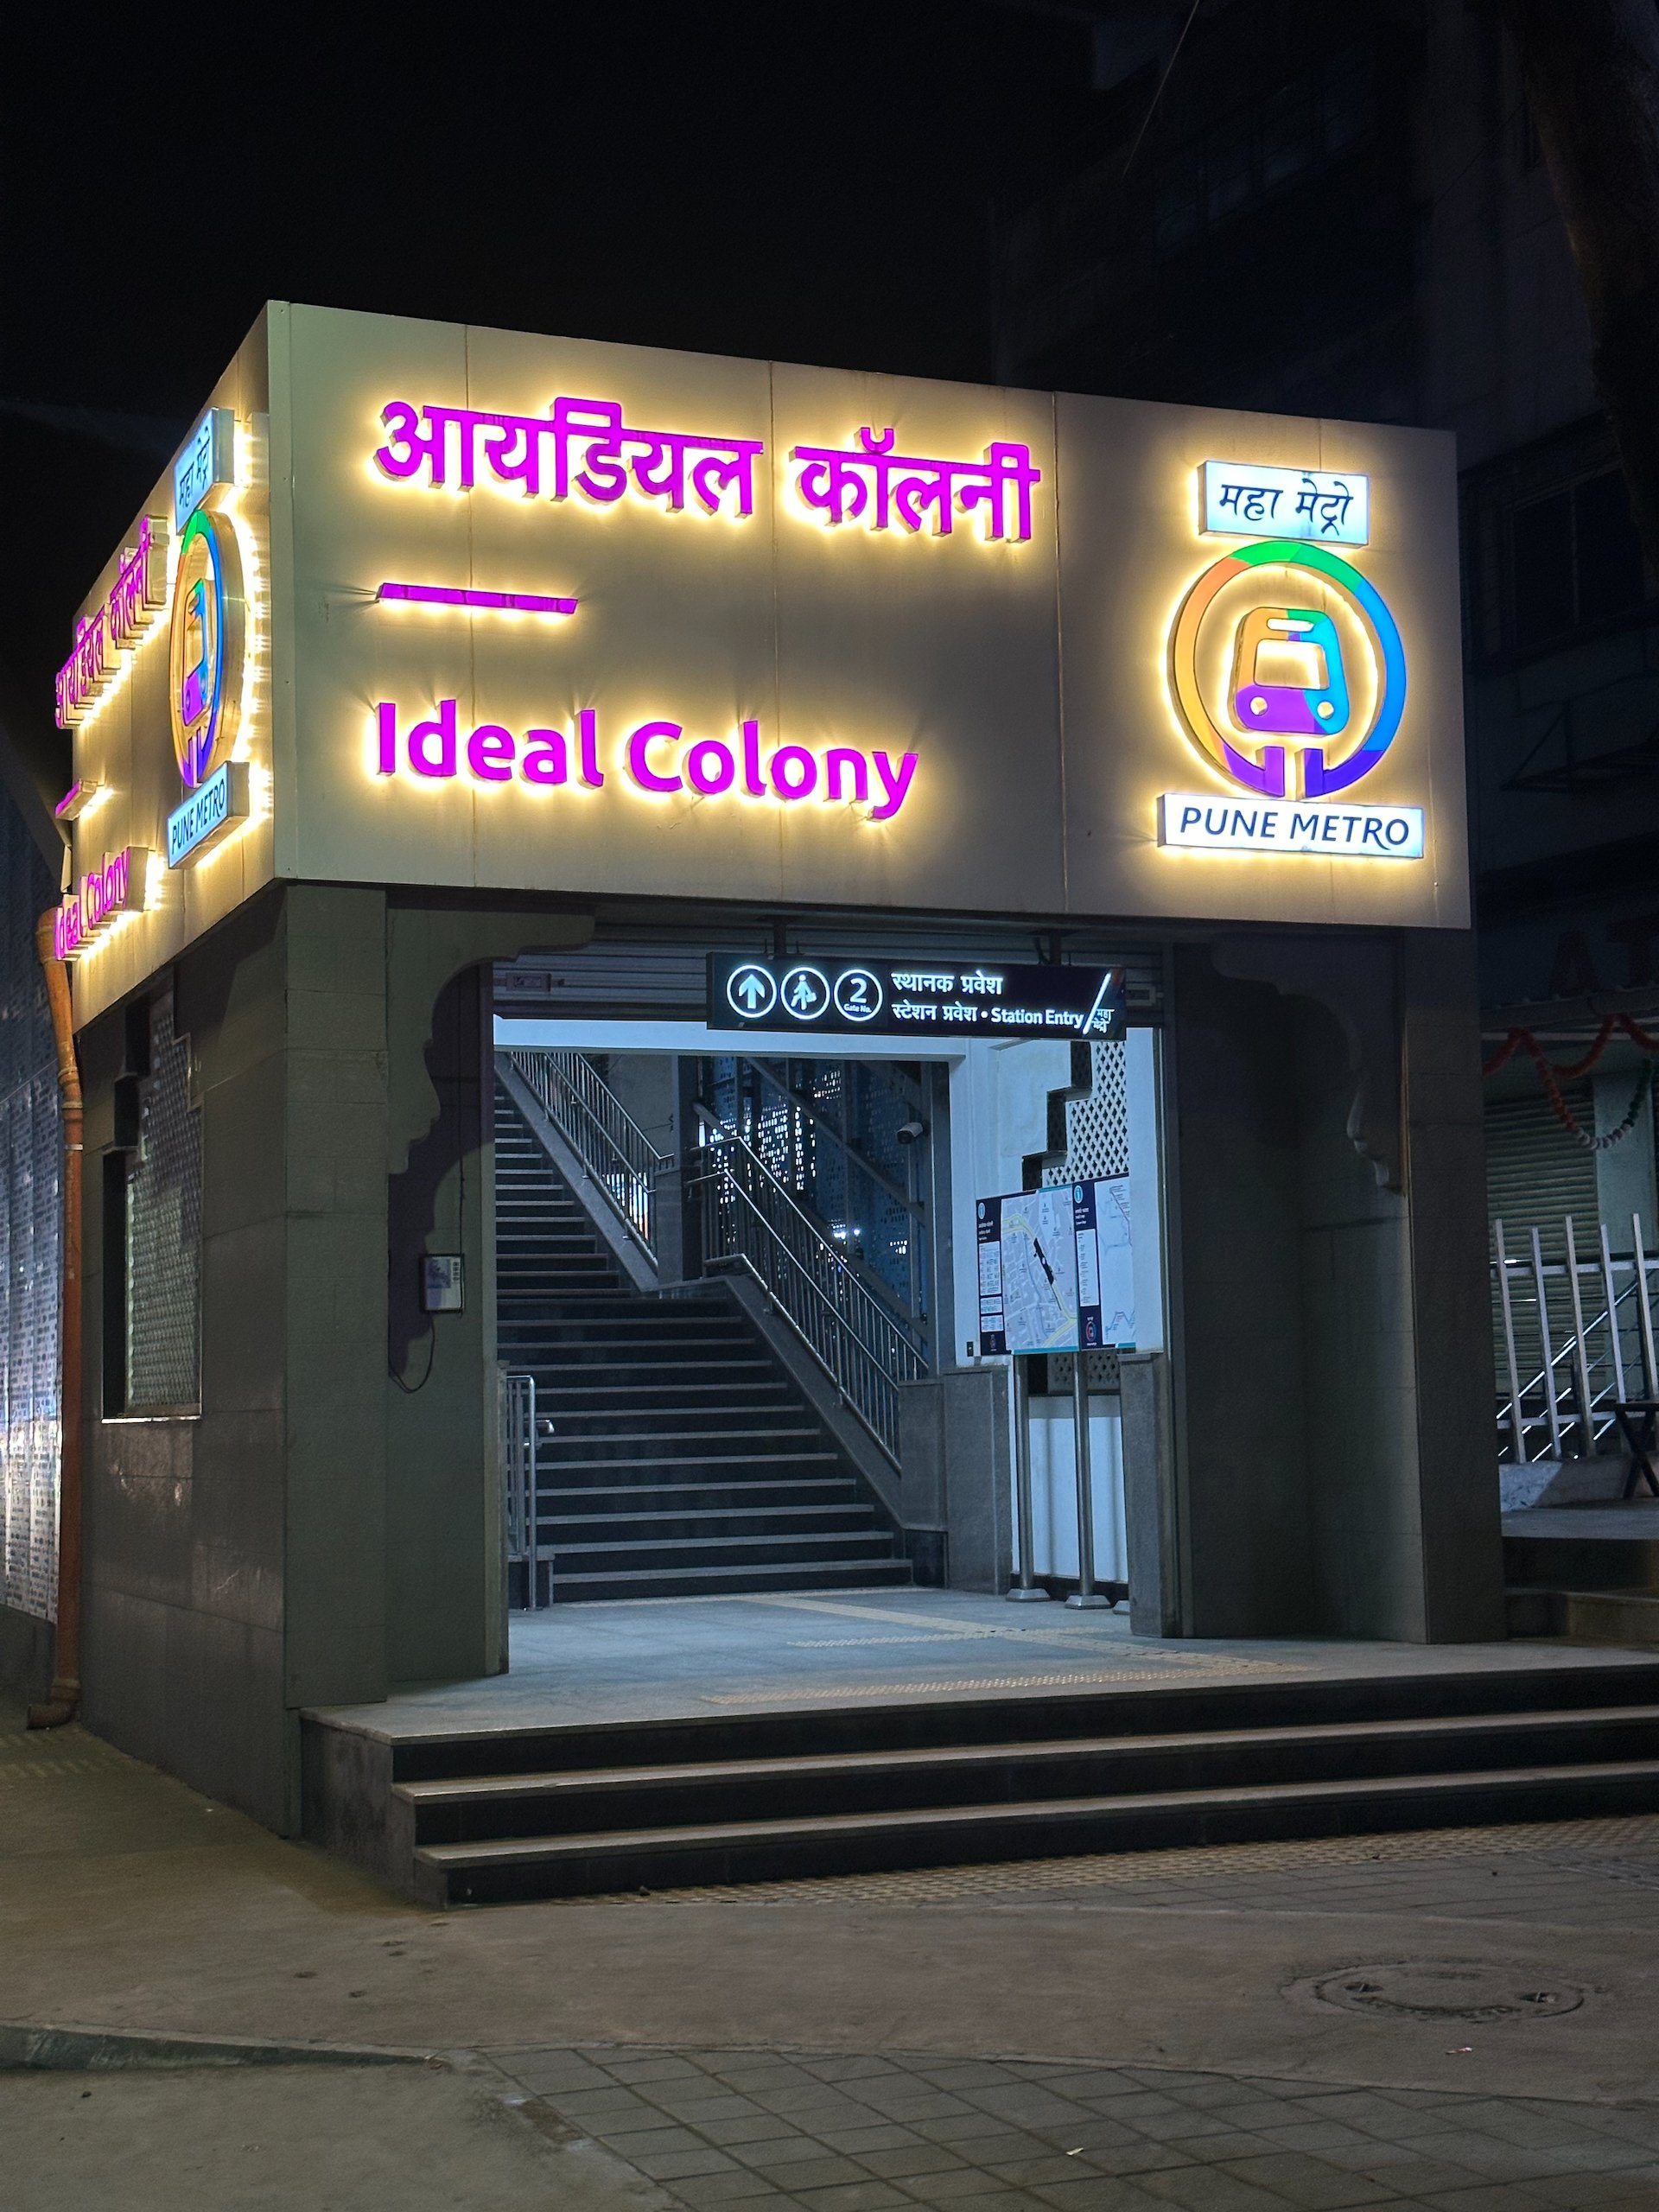  One of the new Metro stations - I have no idea why it’s called “Ideal Colony”, but I found it entertaining.  